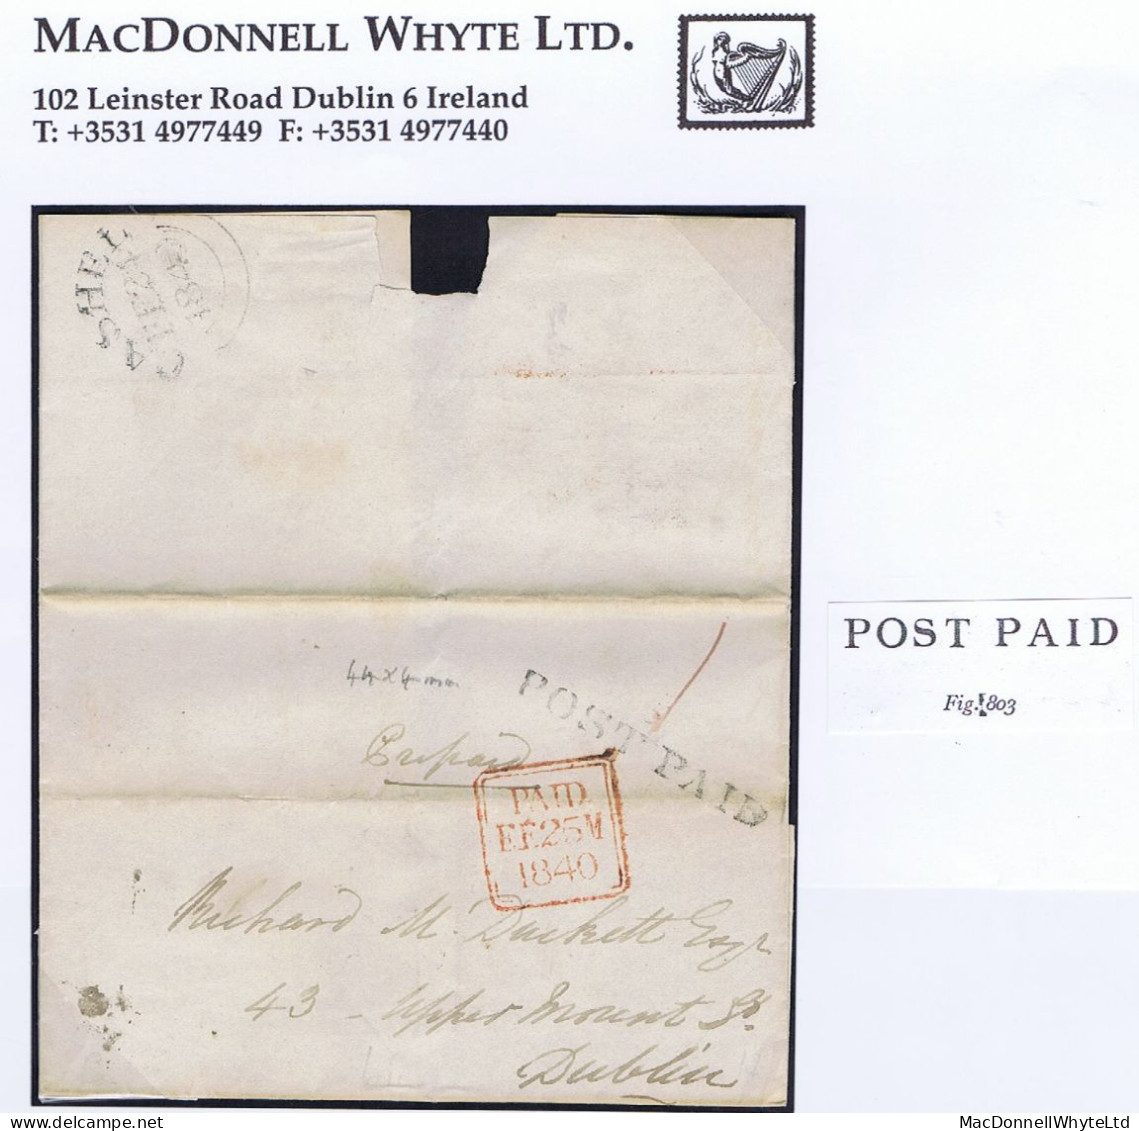 Ireland Tipperary Uniform Penny Post 1840 Cover To Dublin With Unframed POST PAID Of Cashel, CASHEL FE 24 1840 Cds - Vorphilatelie